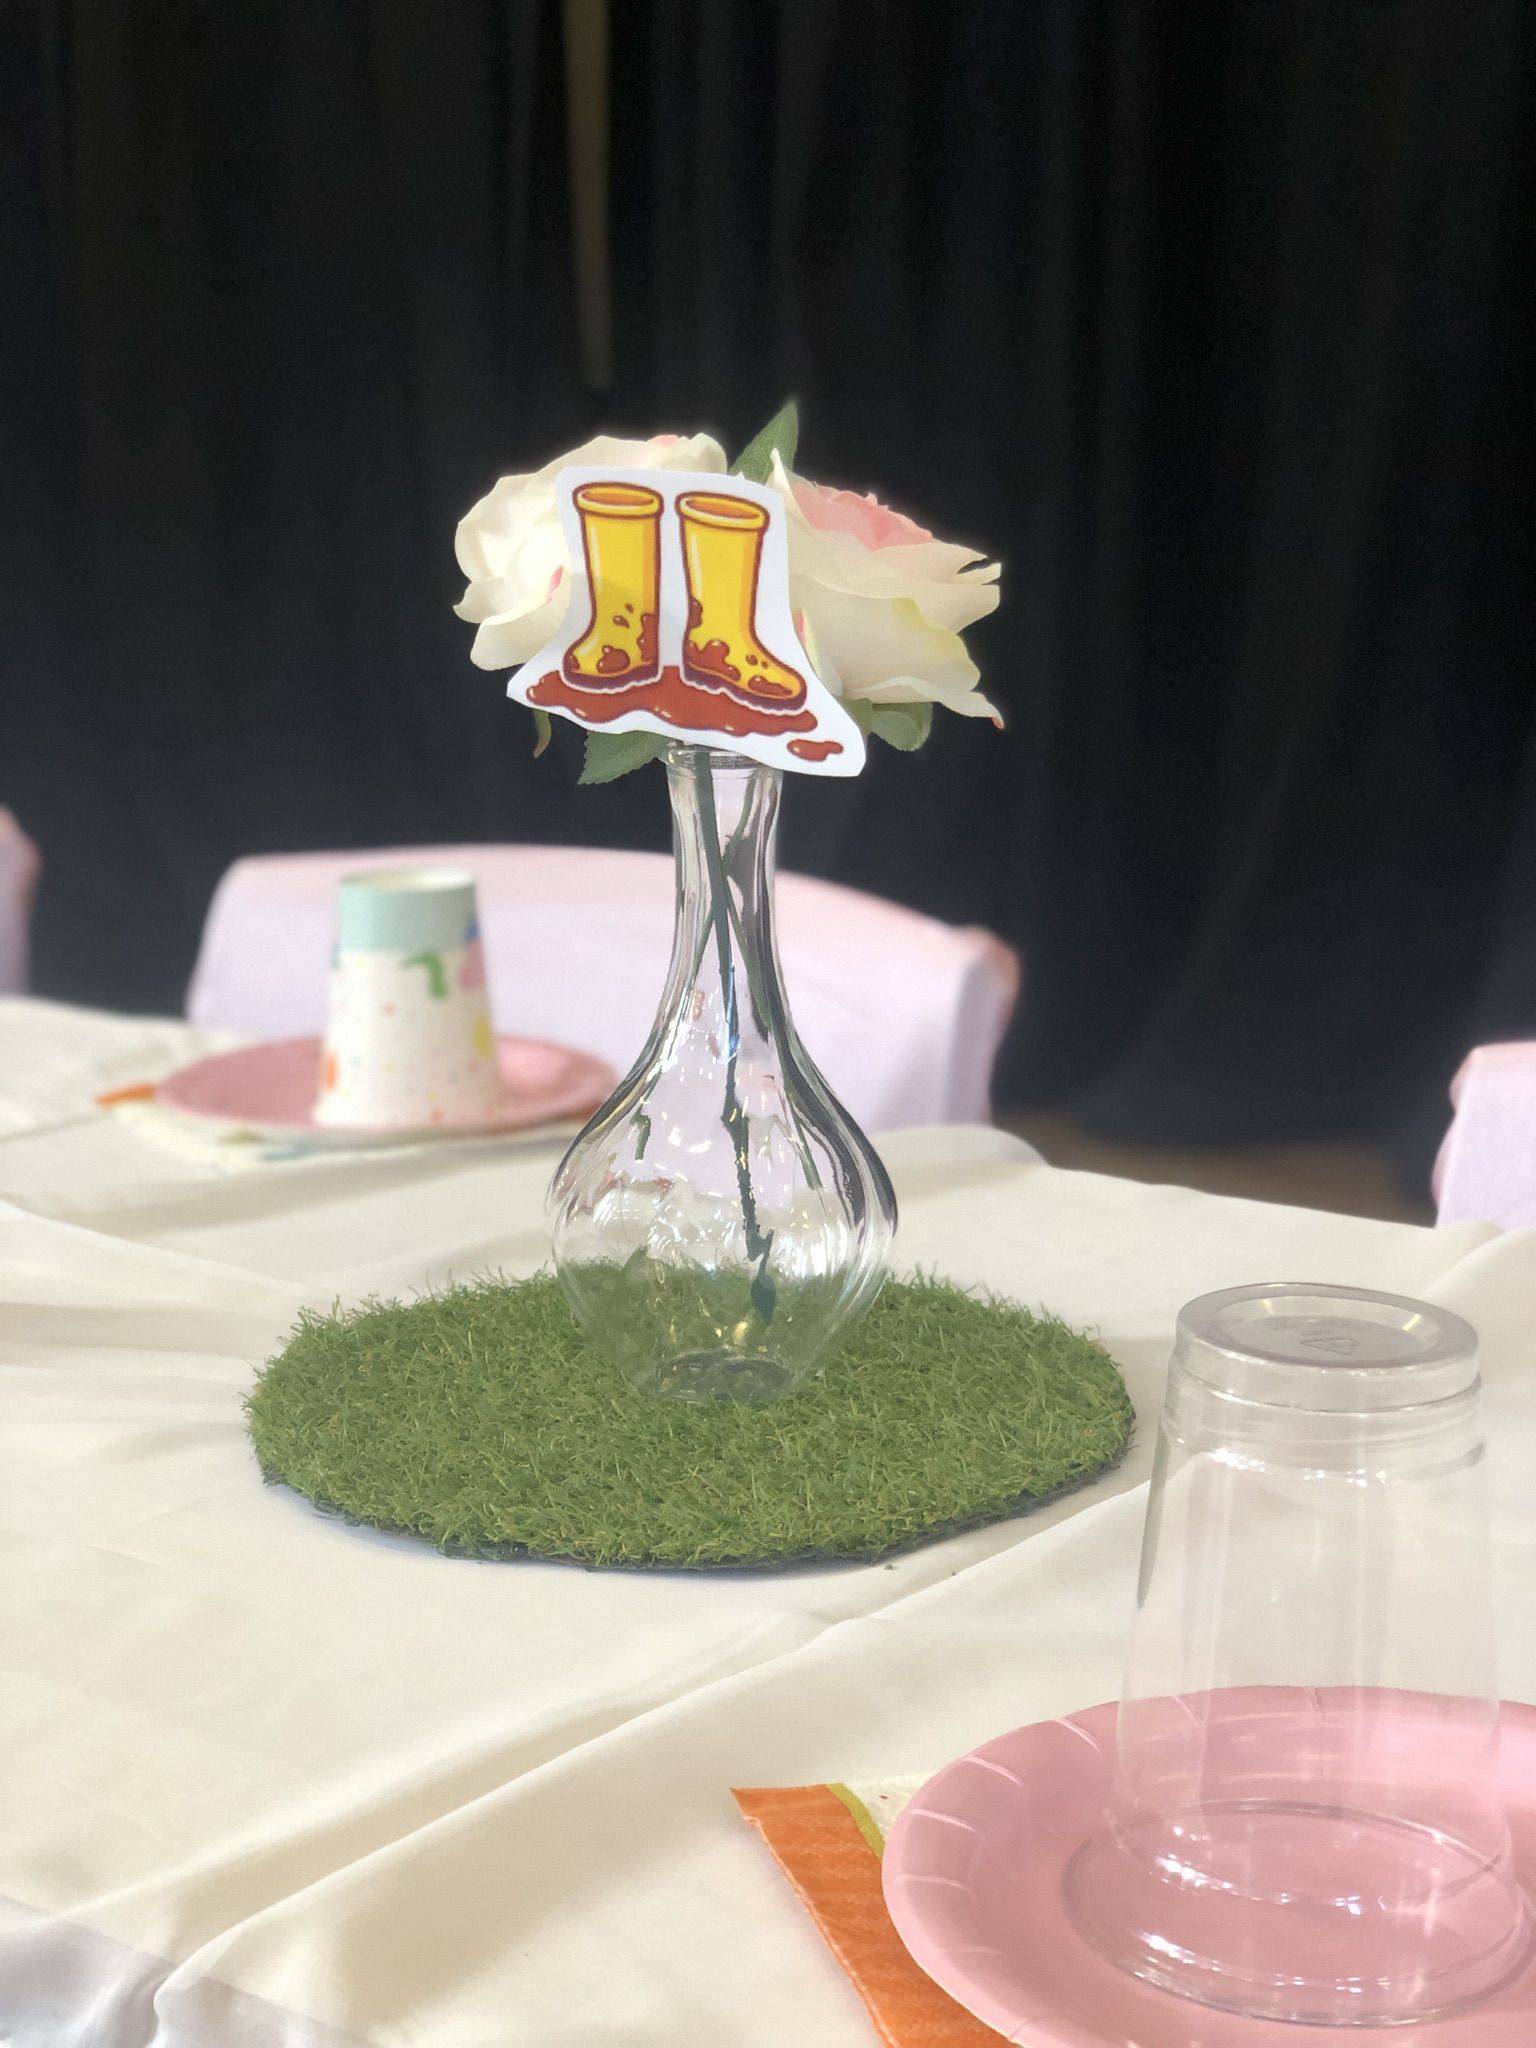 a vase with a flower in it on a table.